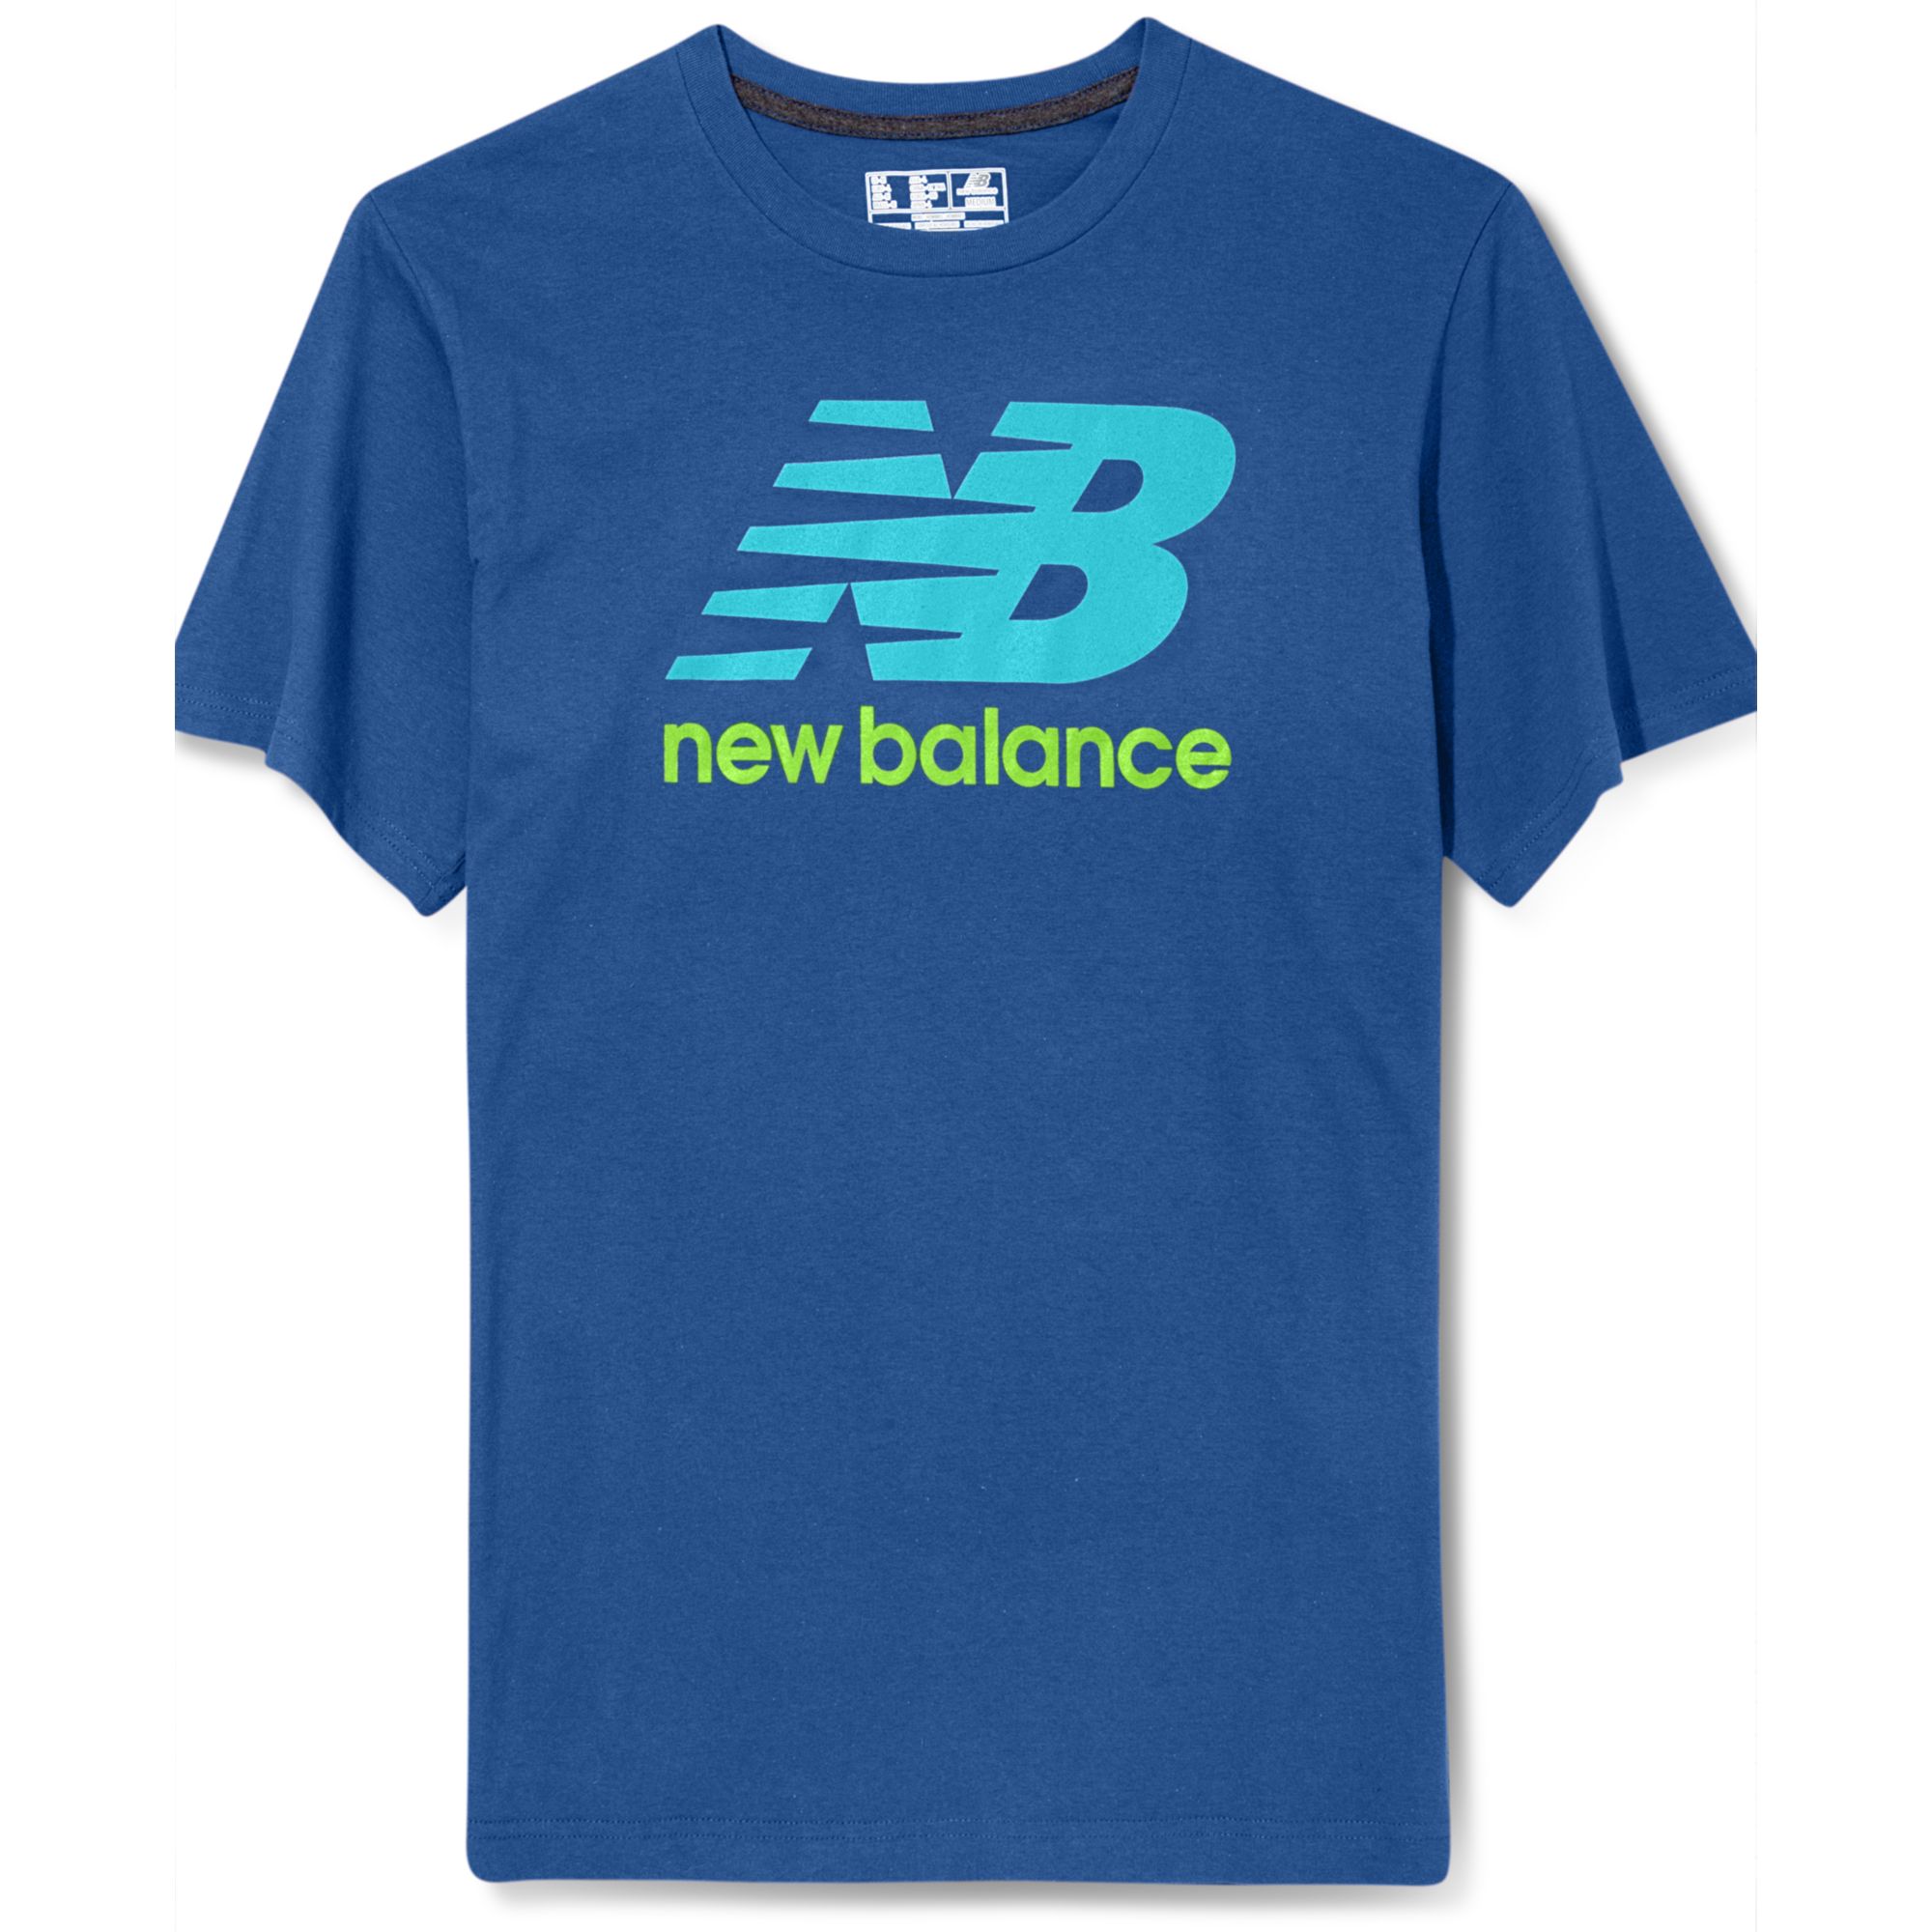 Lyst - New Balance Graphic Logo T Shirt in Blue for Men